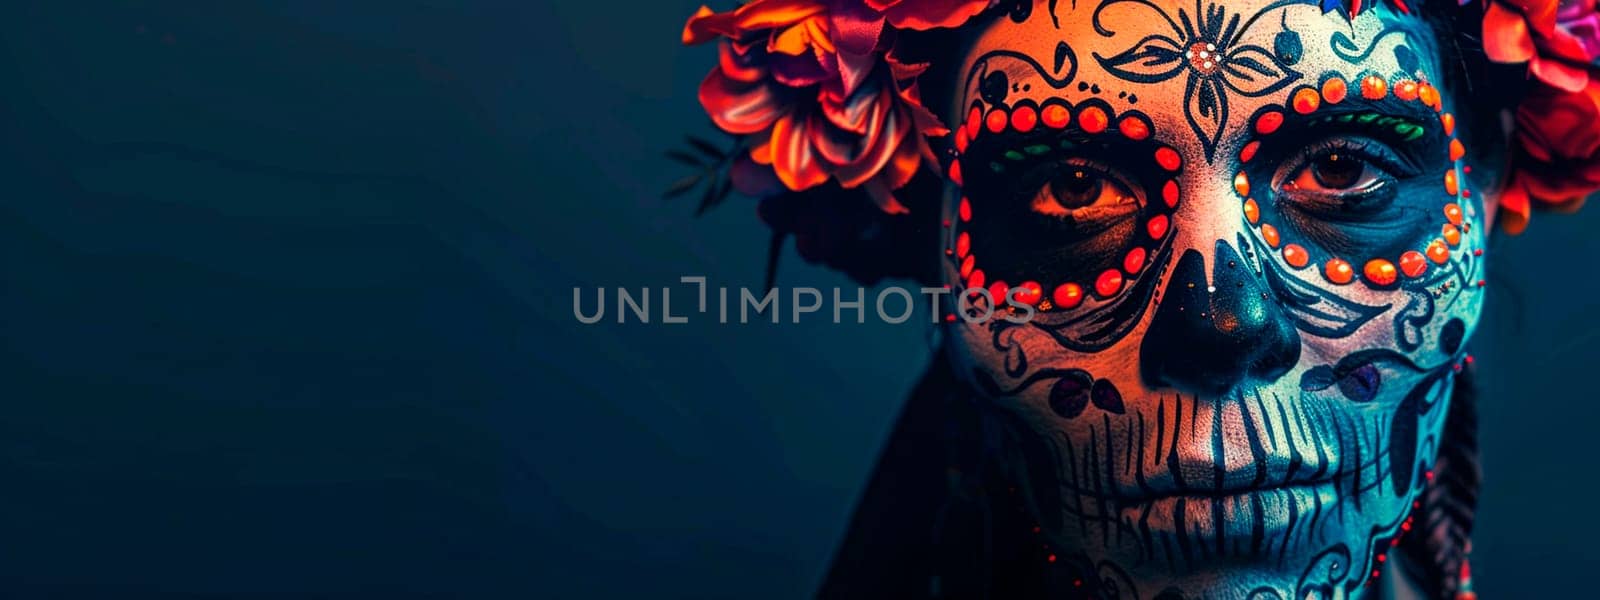 skull for day of the dead. selective focus. by yanadjana